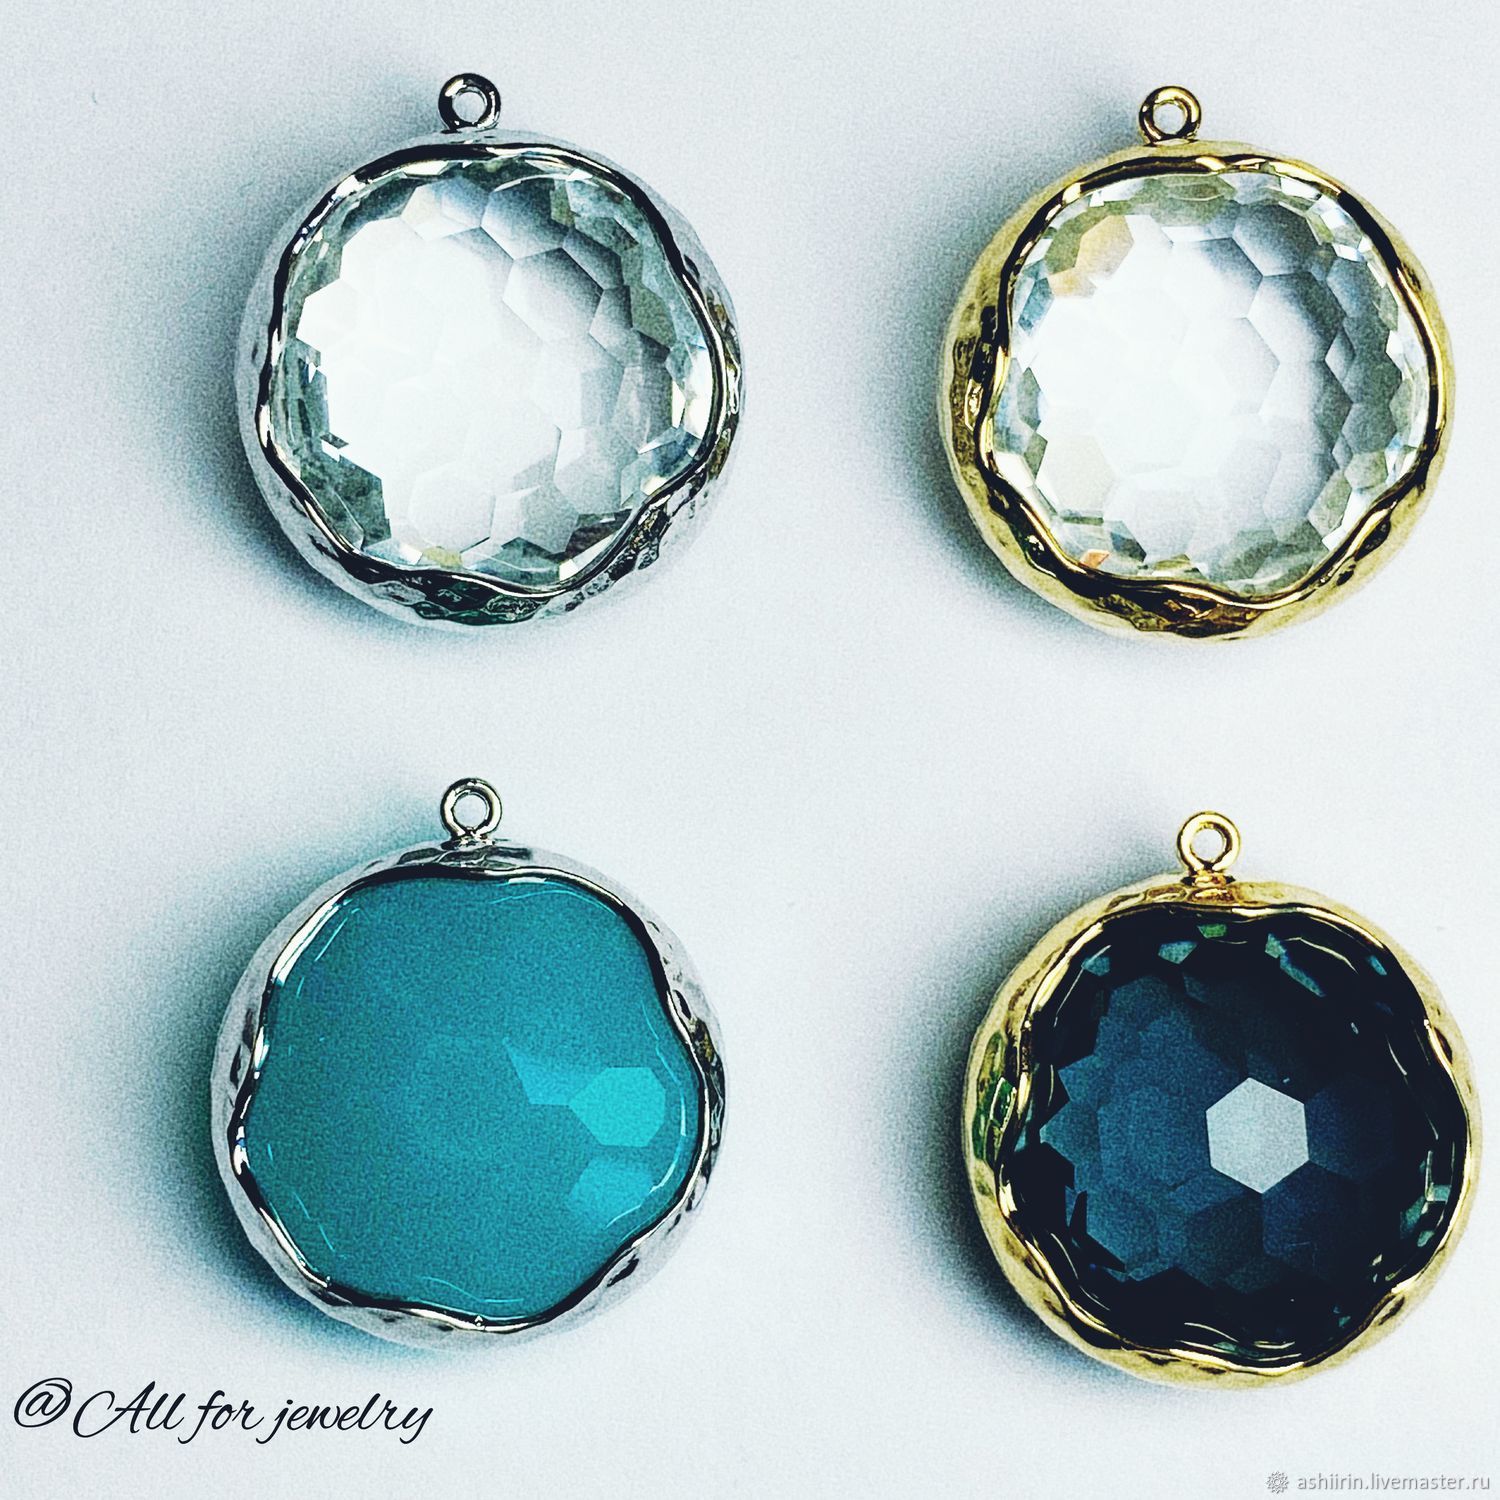 Pendant with faceted jewelry glass UNDER-004 (4 colors) South Korea, Pendants, St. Petersburg,  Фото №1